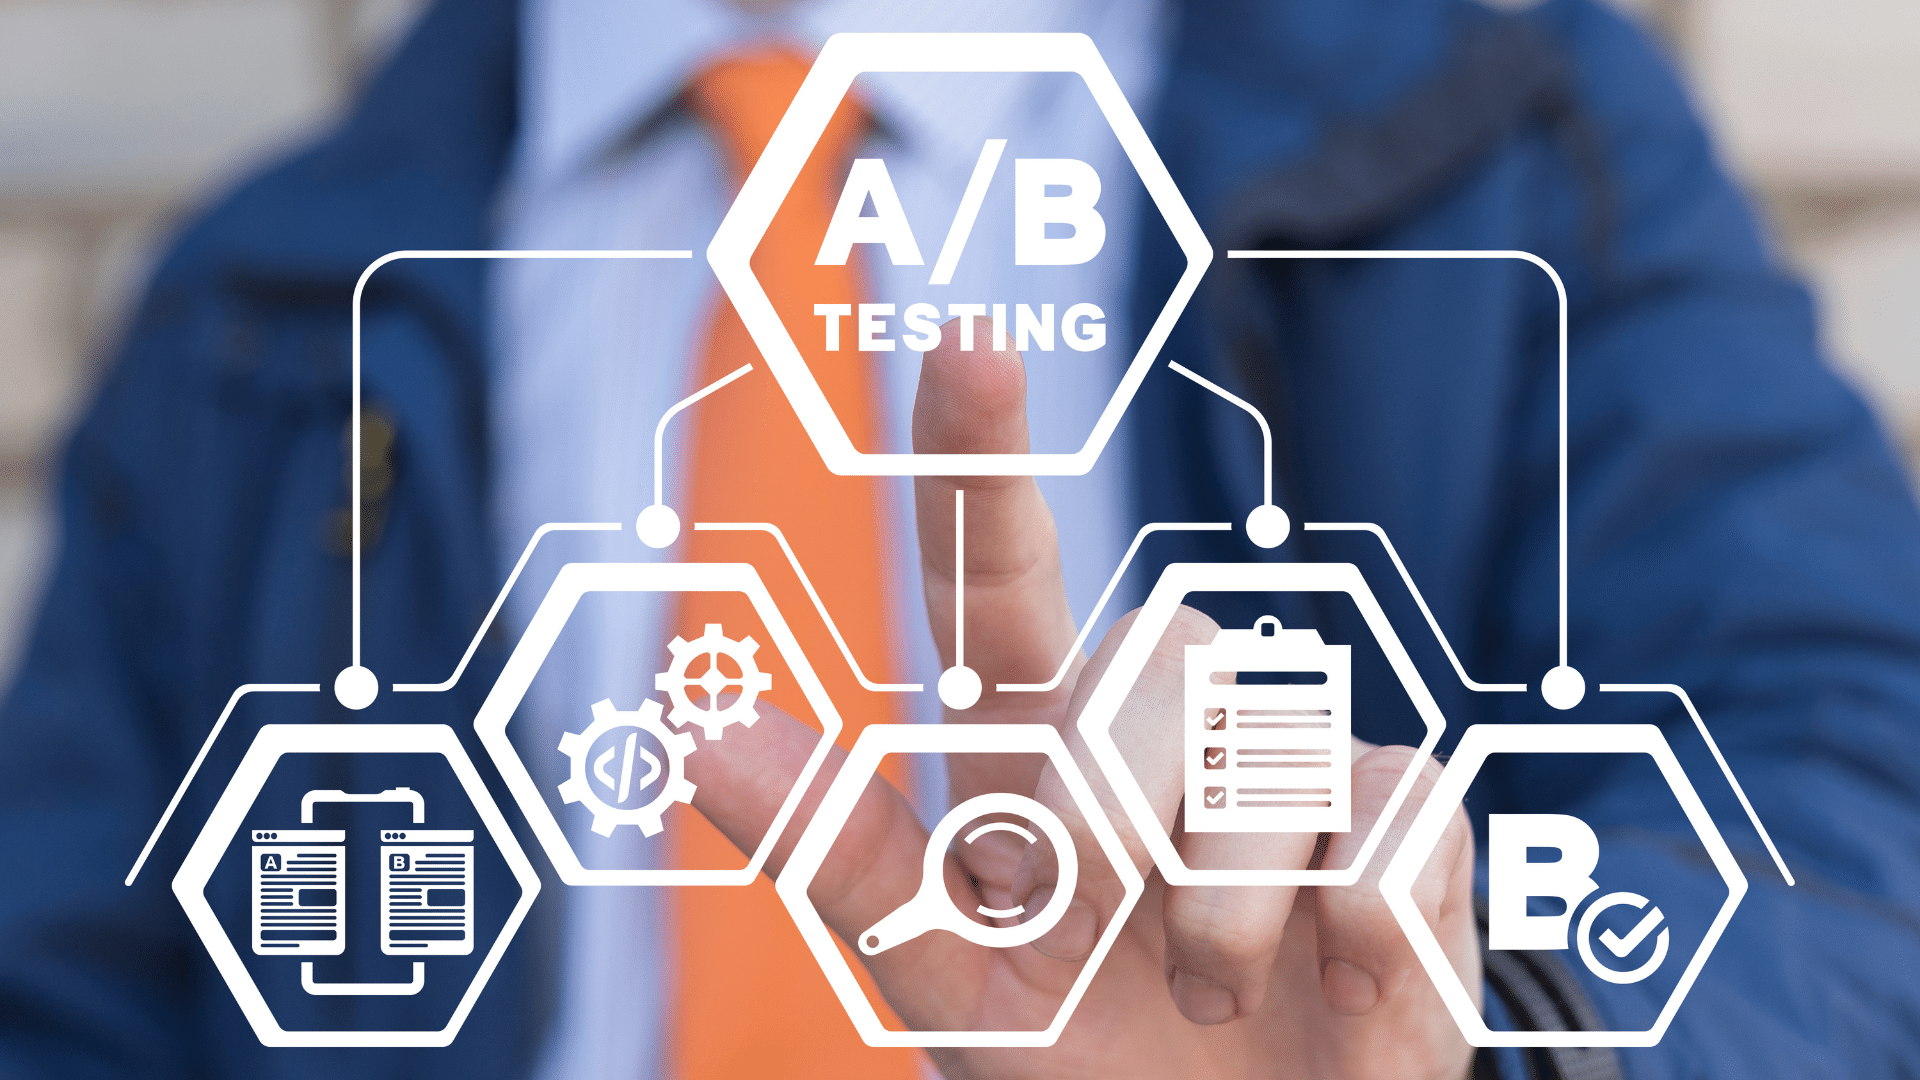 AB Testing Concept - Building a CRO Website? Here Are 10 Easy A/B Tests You Should Perform to Boost Conversions 